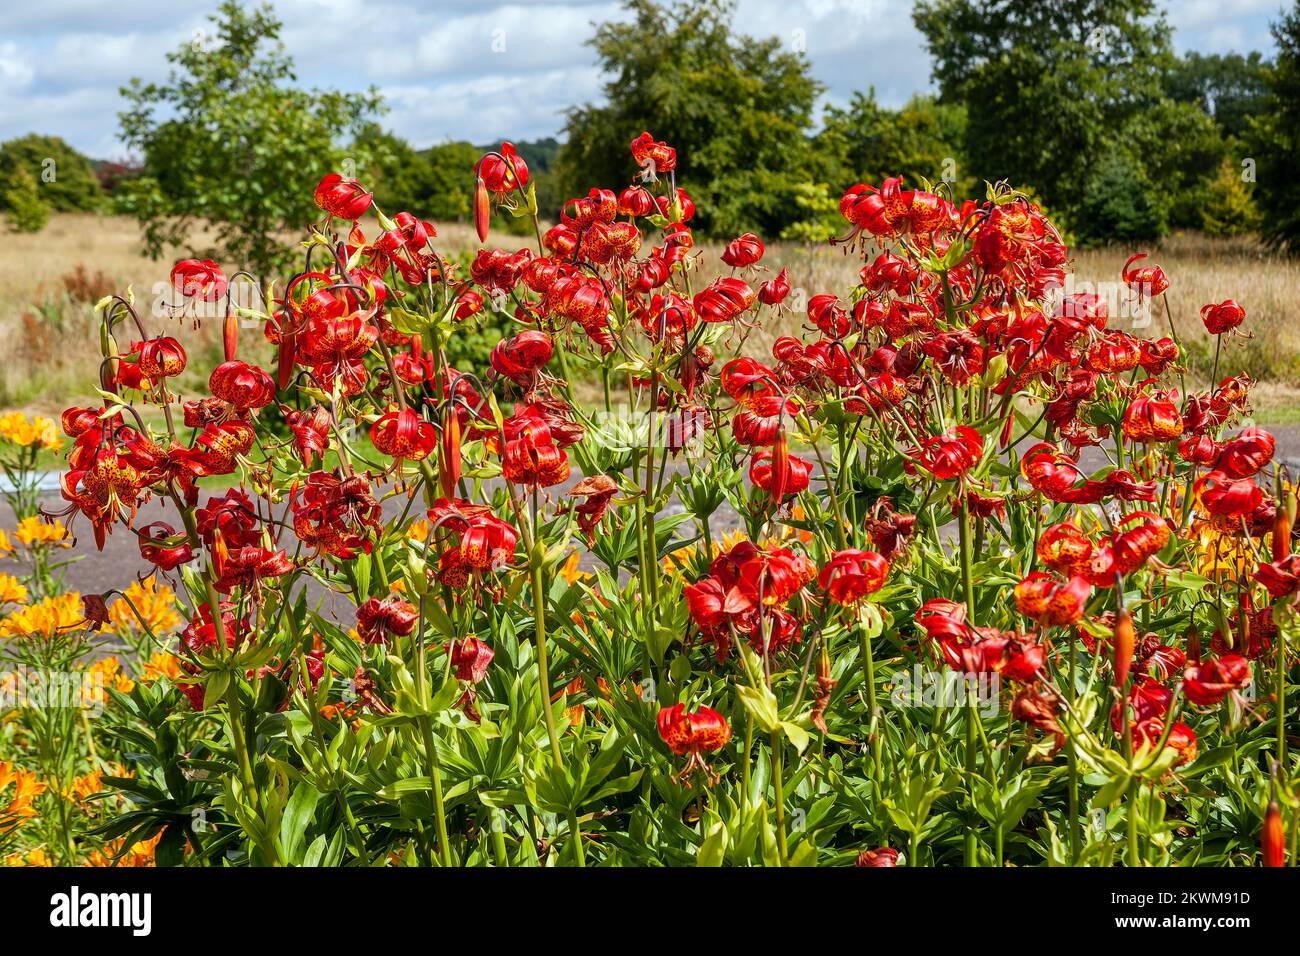 Lilium pardalinum 'Giganteum' a summer autumn fall flowering bulbous plant with a red orange spotted summertime flower commonly known as Red Giant or Stock Photo